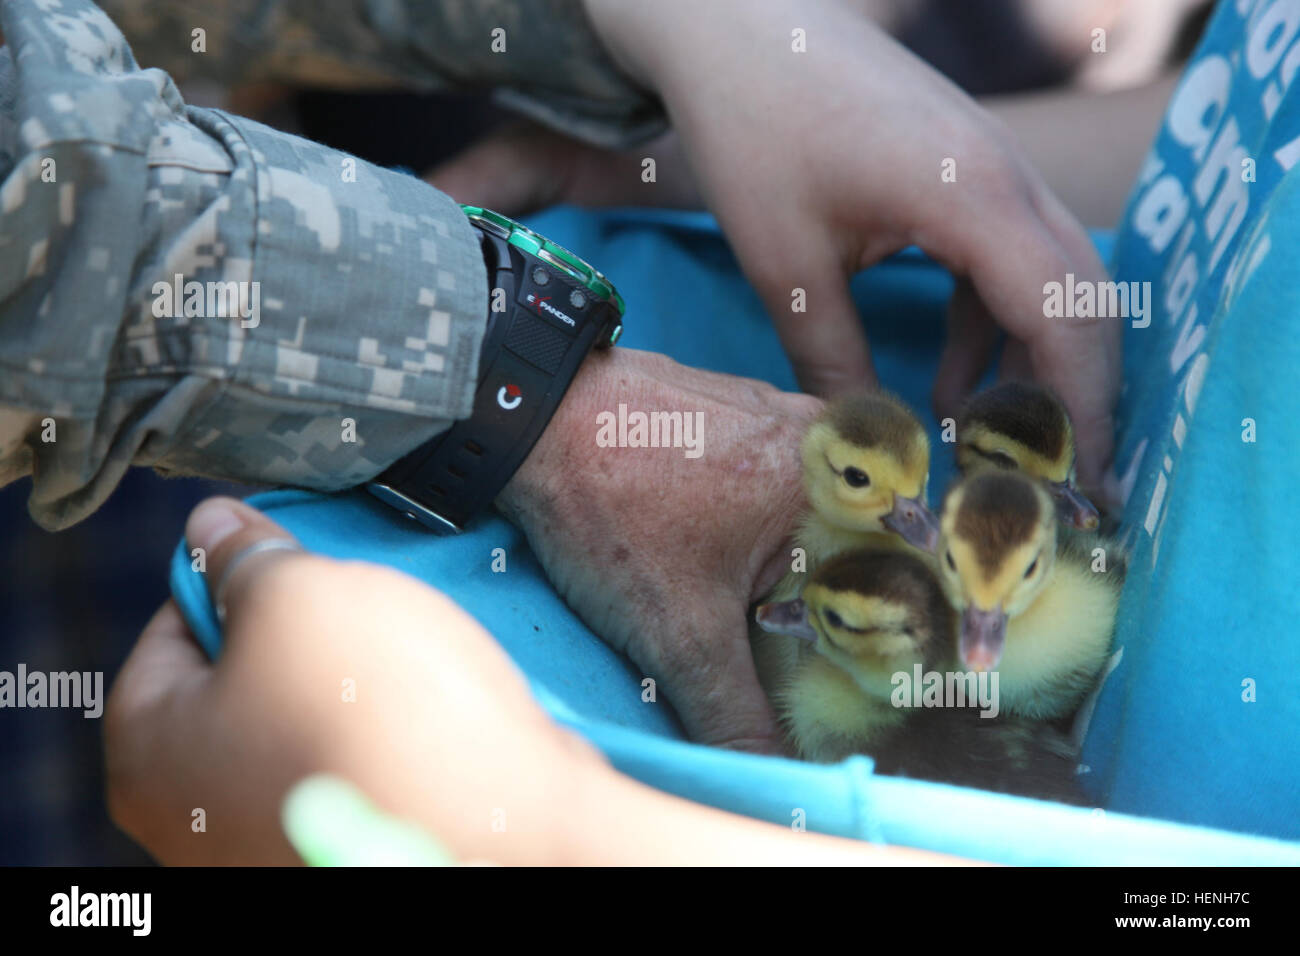 U.S. Army Maj. Victoria Smith, of the 149th Medical Detachment Veterinary Services, vaccinates ducklings for a Veterinary Readiness Training Exercise during Beyond the Horizon, San Jose, Guatemala, May 25, 2015. Beyond the Horizon is an annual exercise that embraces the partnership between the United States and Guatemala, to provide focused humanitarian assistance through various medical, dental, and civic action programs. (U.S. Army photo by Pfc. Christopher Martin/Released) Beyond the Horizon 2014, Guatemala 140525-A-GA303-093 Stock Photo